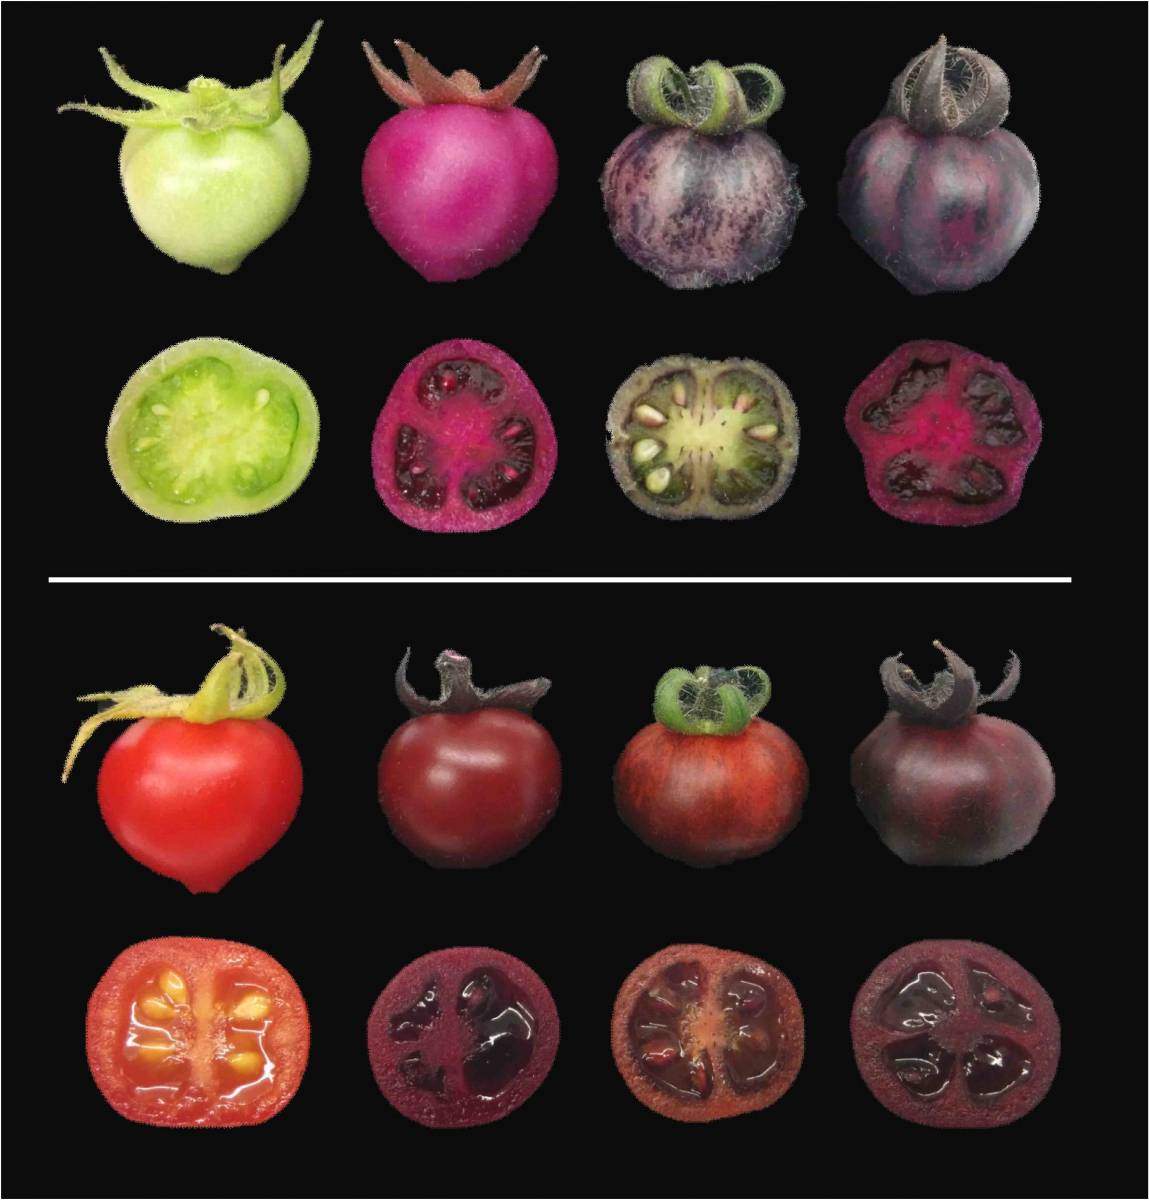 Unripe (top) and ripe (bottom) tomatoes. Regular tomatoes (far left) start out green and turn red when ripe. In contrast, genetically engineered tomatoes assume different shades of red-violet, depending on whether they produce betalains (second from left), pigments called anthocyanins (second from right) or betalains together with anthocyanins (far right)